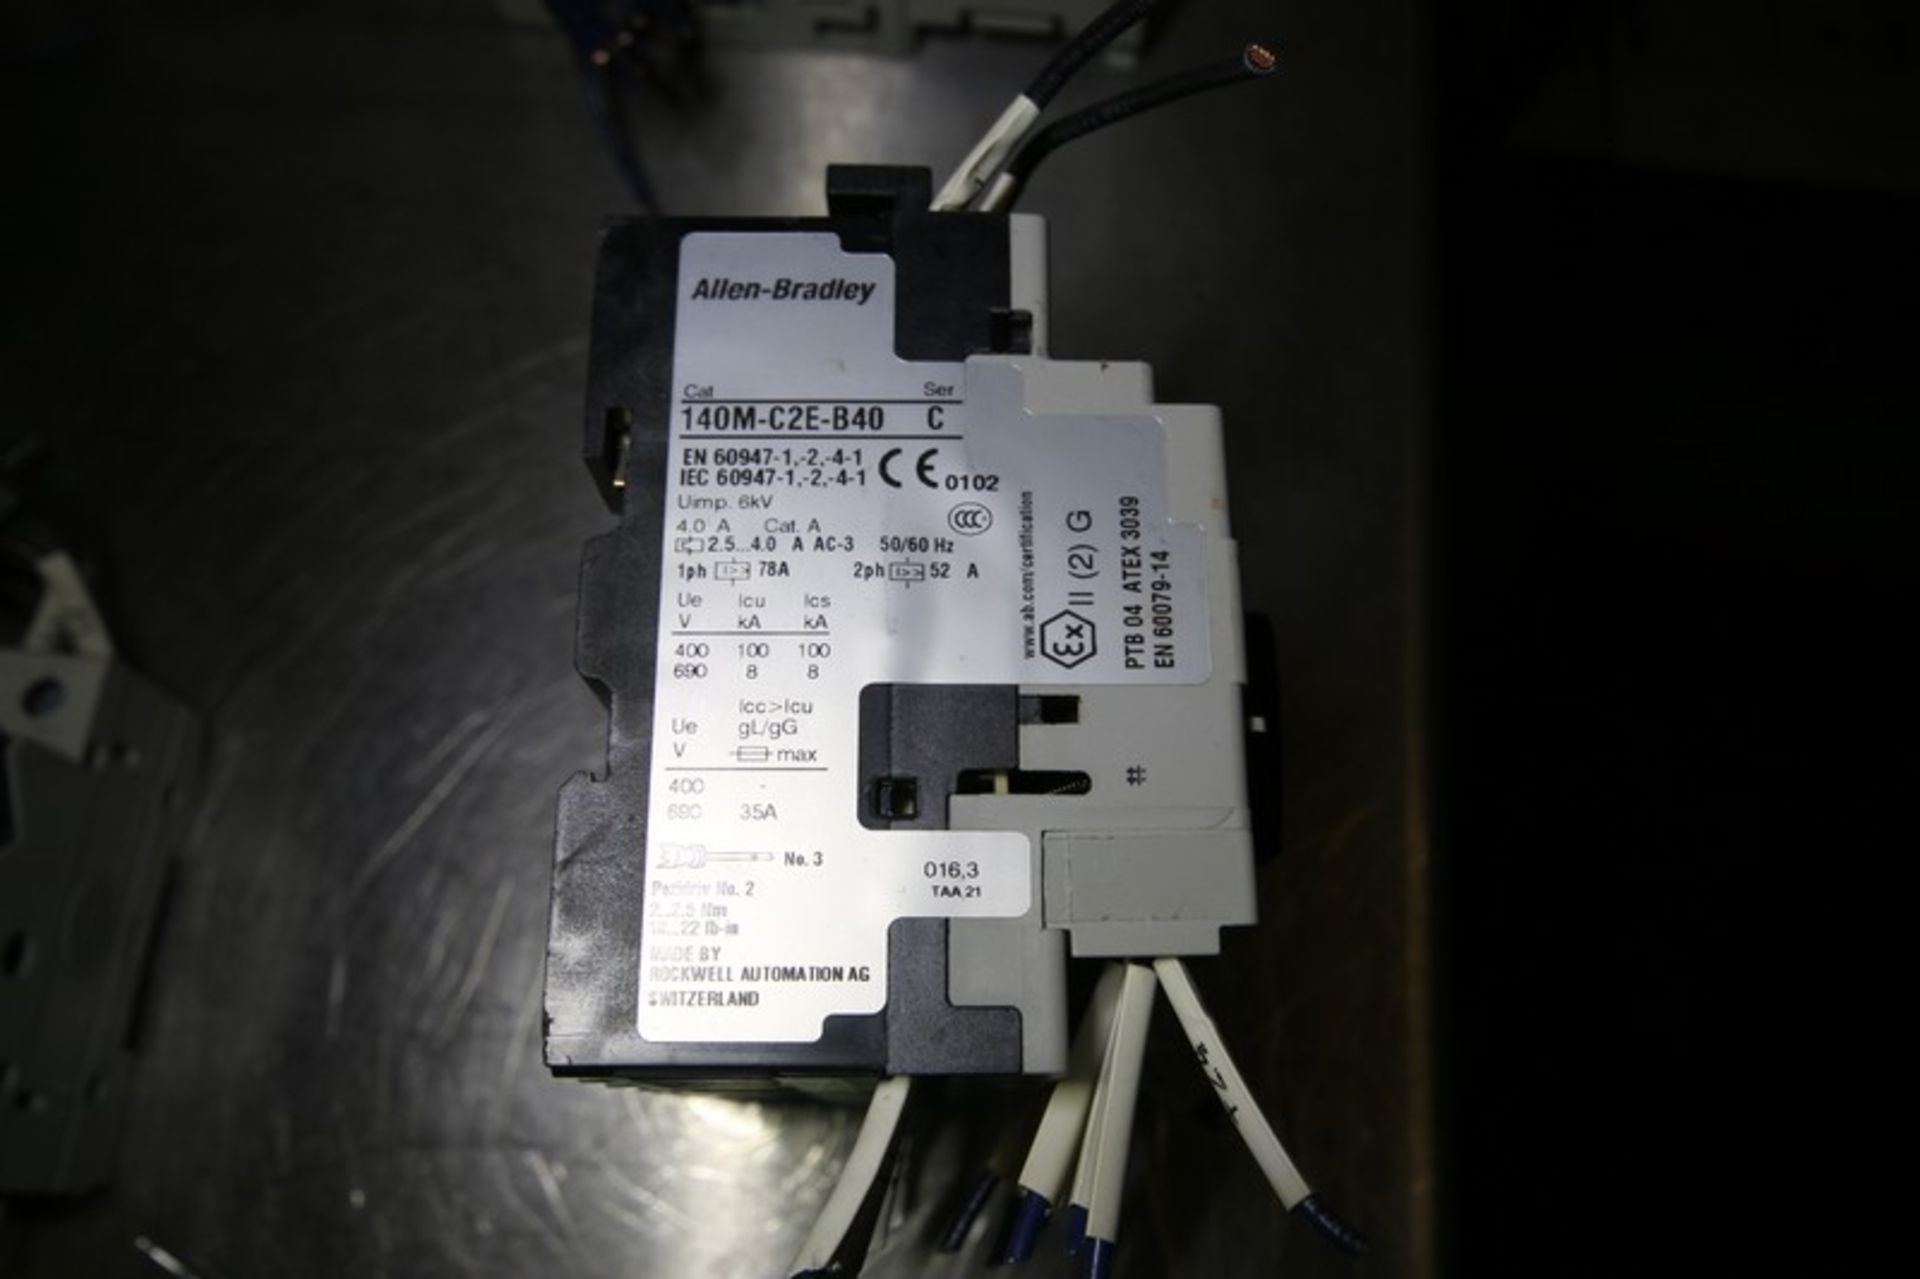 Production Control Panel Electrical Includes Allen Bradley Micrologix 1000 PLC Controller - Cat. No. - Image 11 of 11